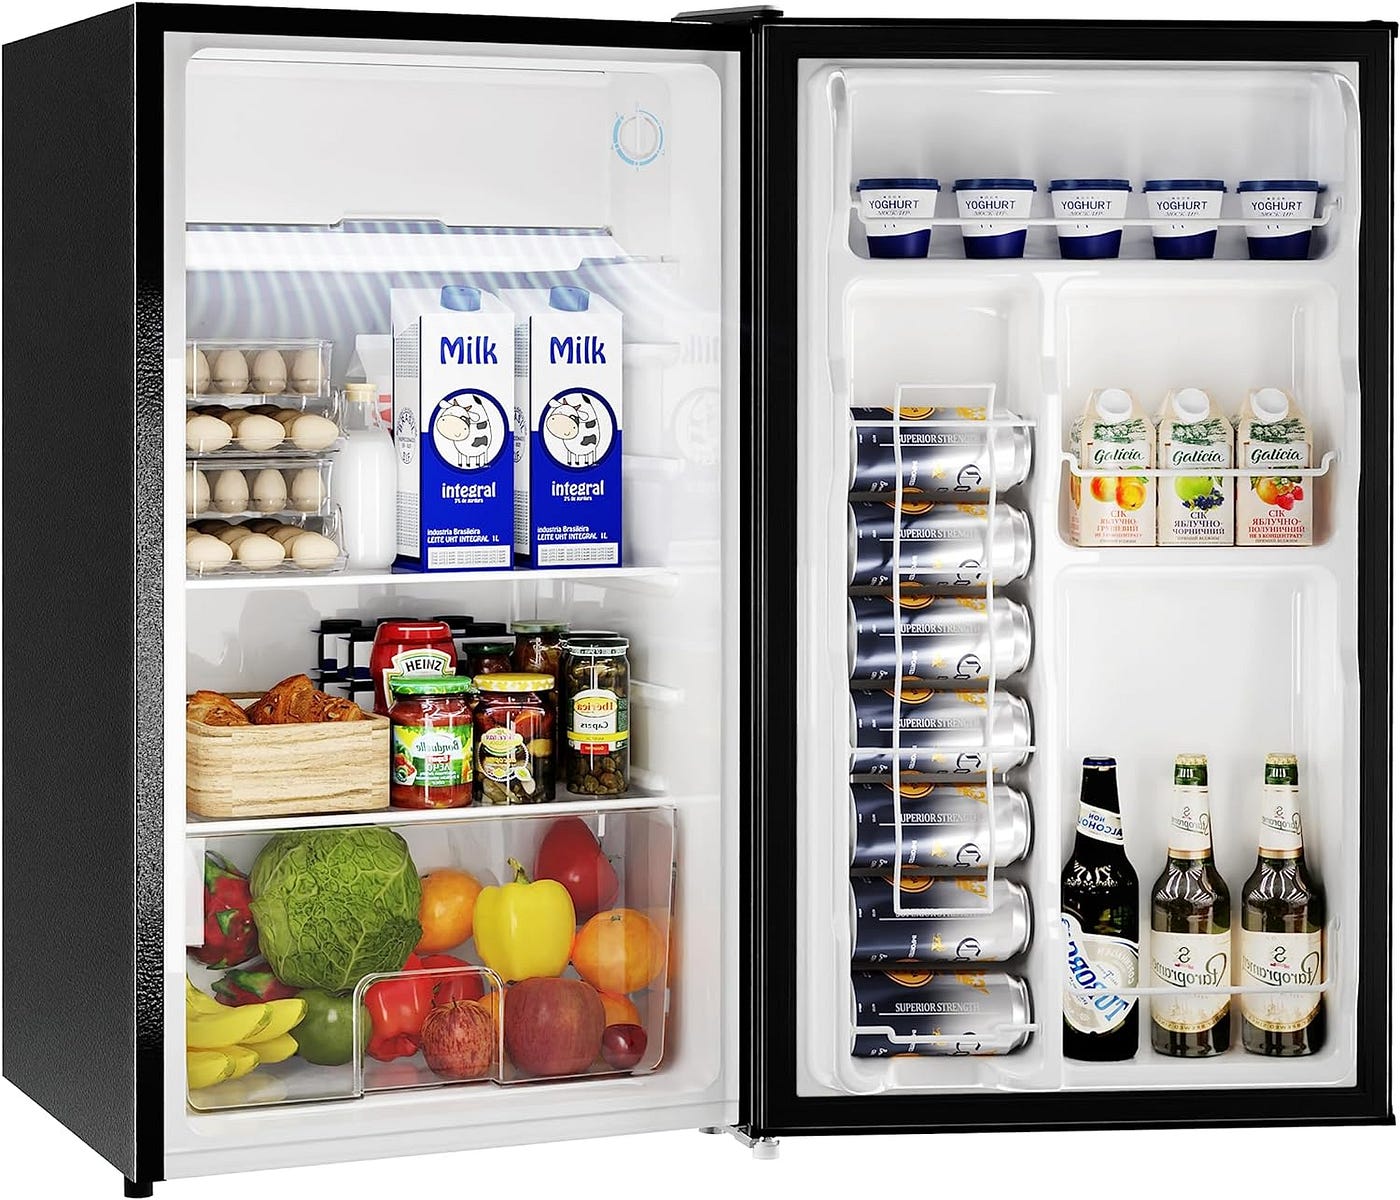 Which Is Better for You: A Mini Fridge or a Full-Sized Fridge?, by Justine  Latimore